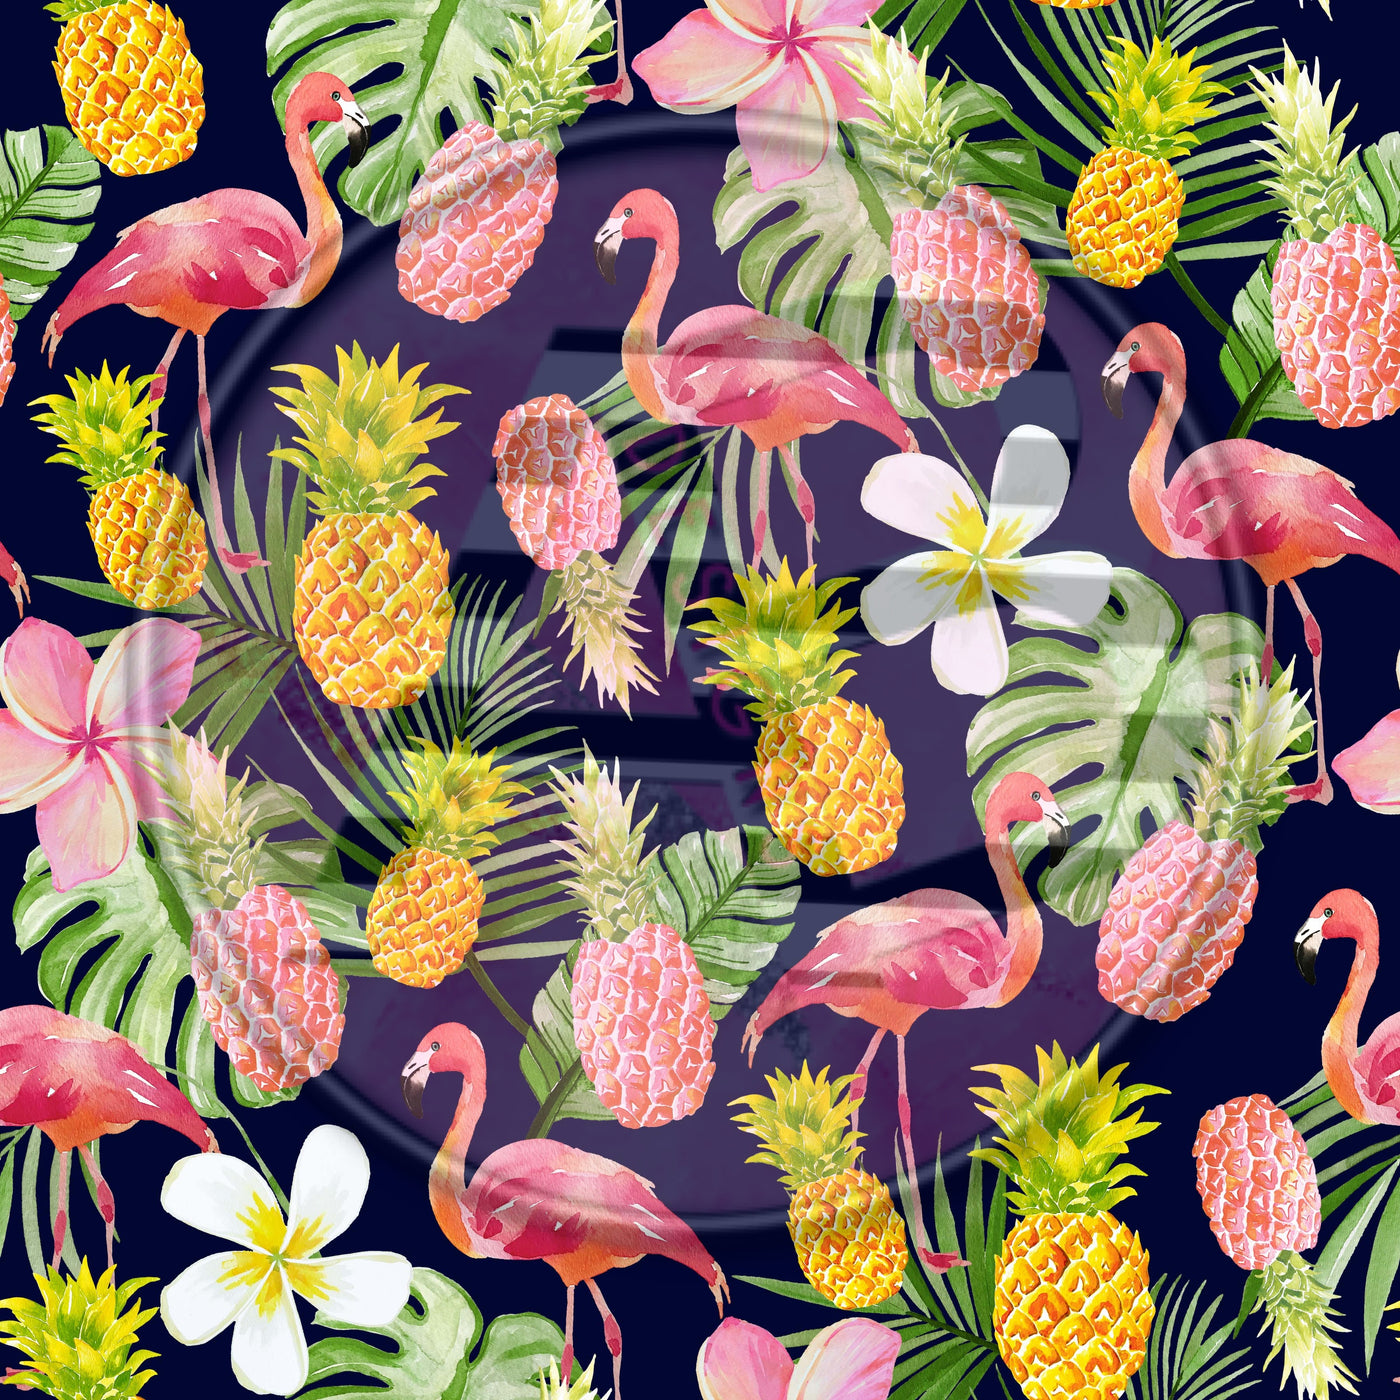 Adhesive Patterned Vinyl - Tropical 2158